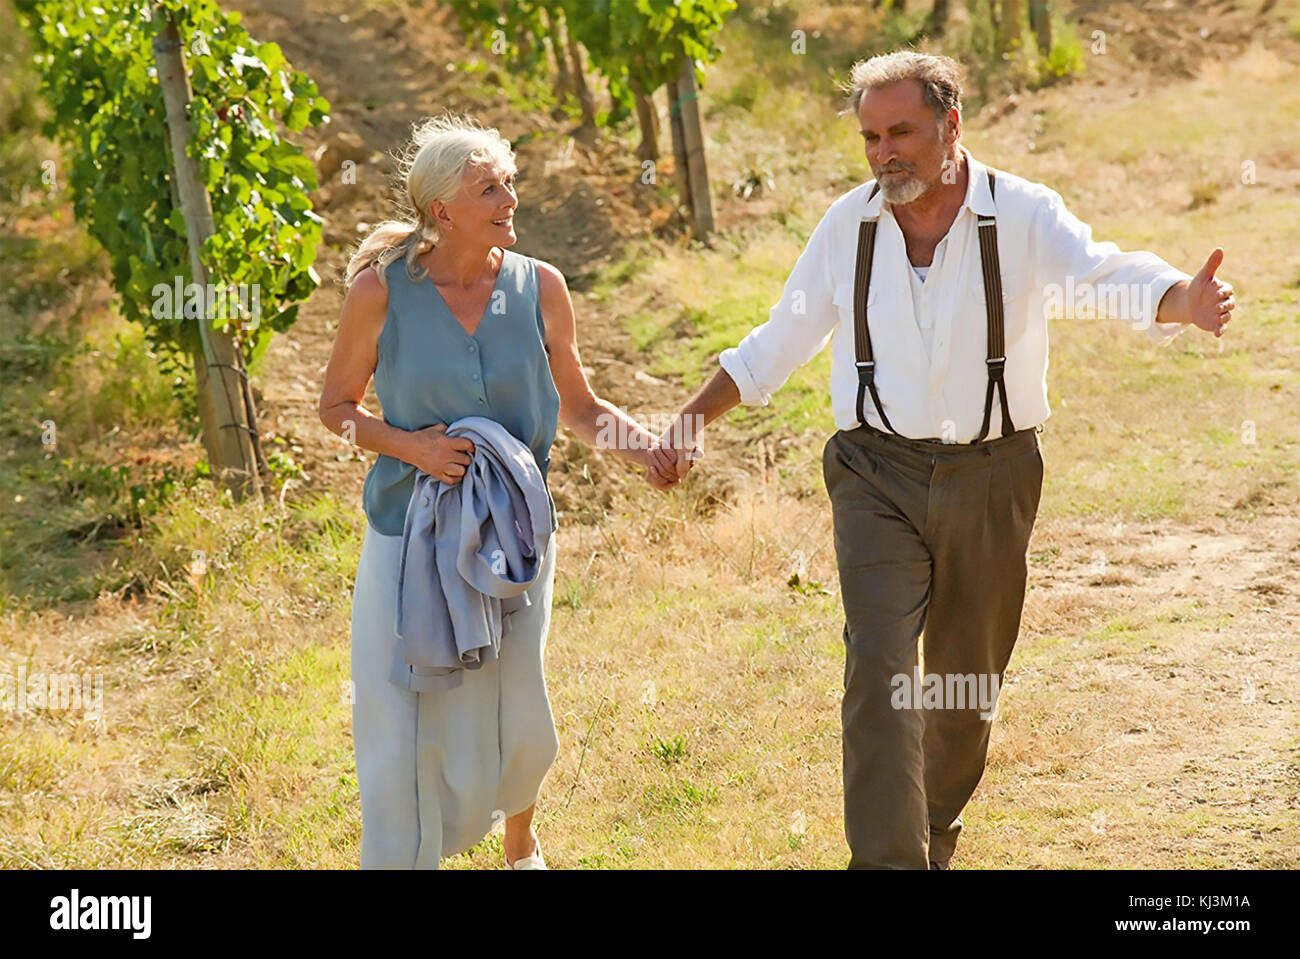 LETTERS TO JULIET 2010 Summit Entertainment film with Franco Nero and Vanessa Redgrave Stock Photo